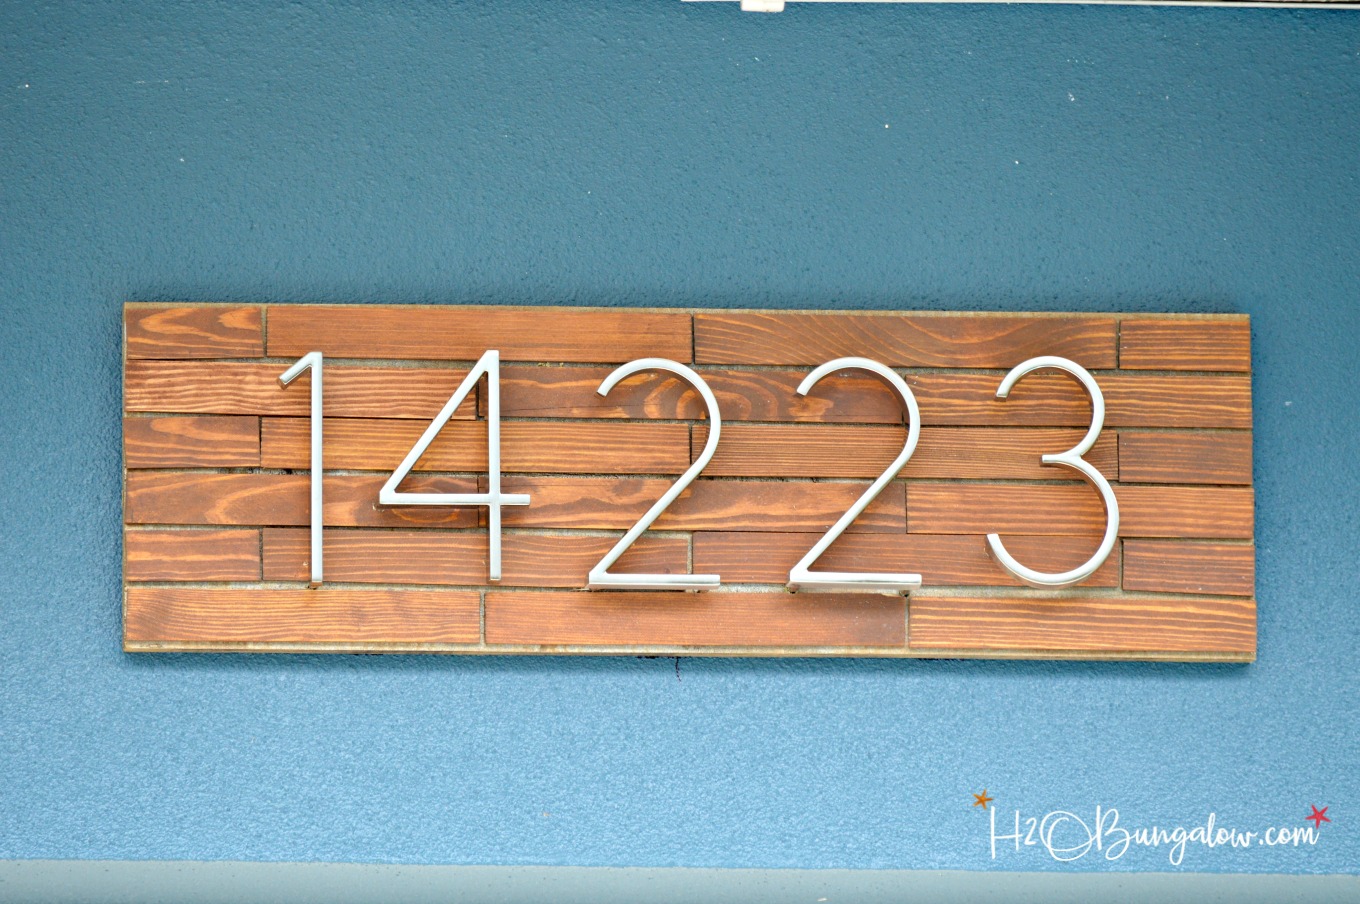 Add instant curb appeal. Easy modern DIY Horizontal Wood Slat Address Plaque Tutorial. Use only a jigsaw, glue and outdoor mounting tape. Drill optional to float letters. 